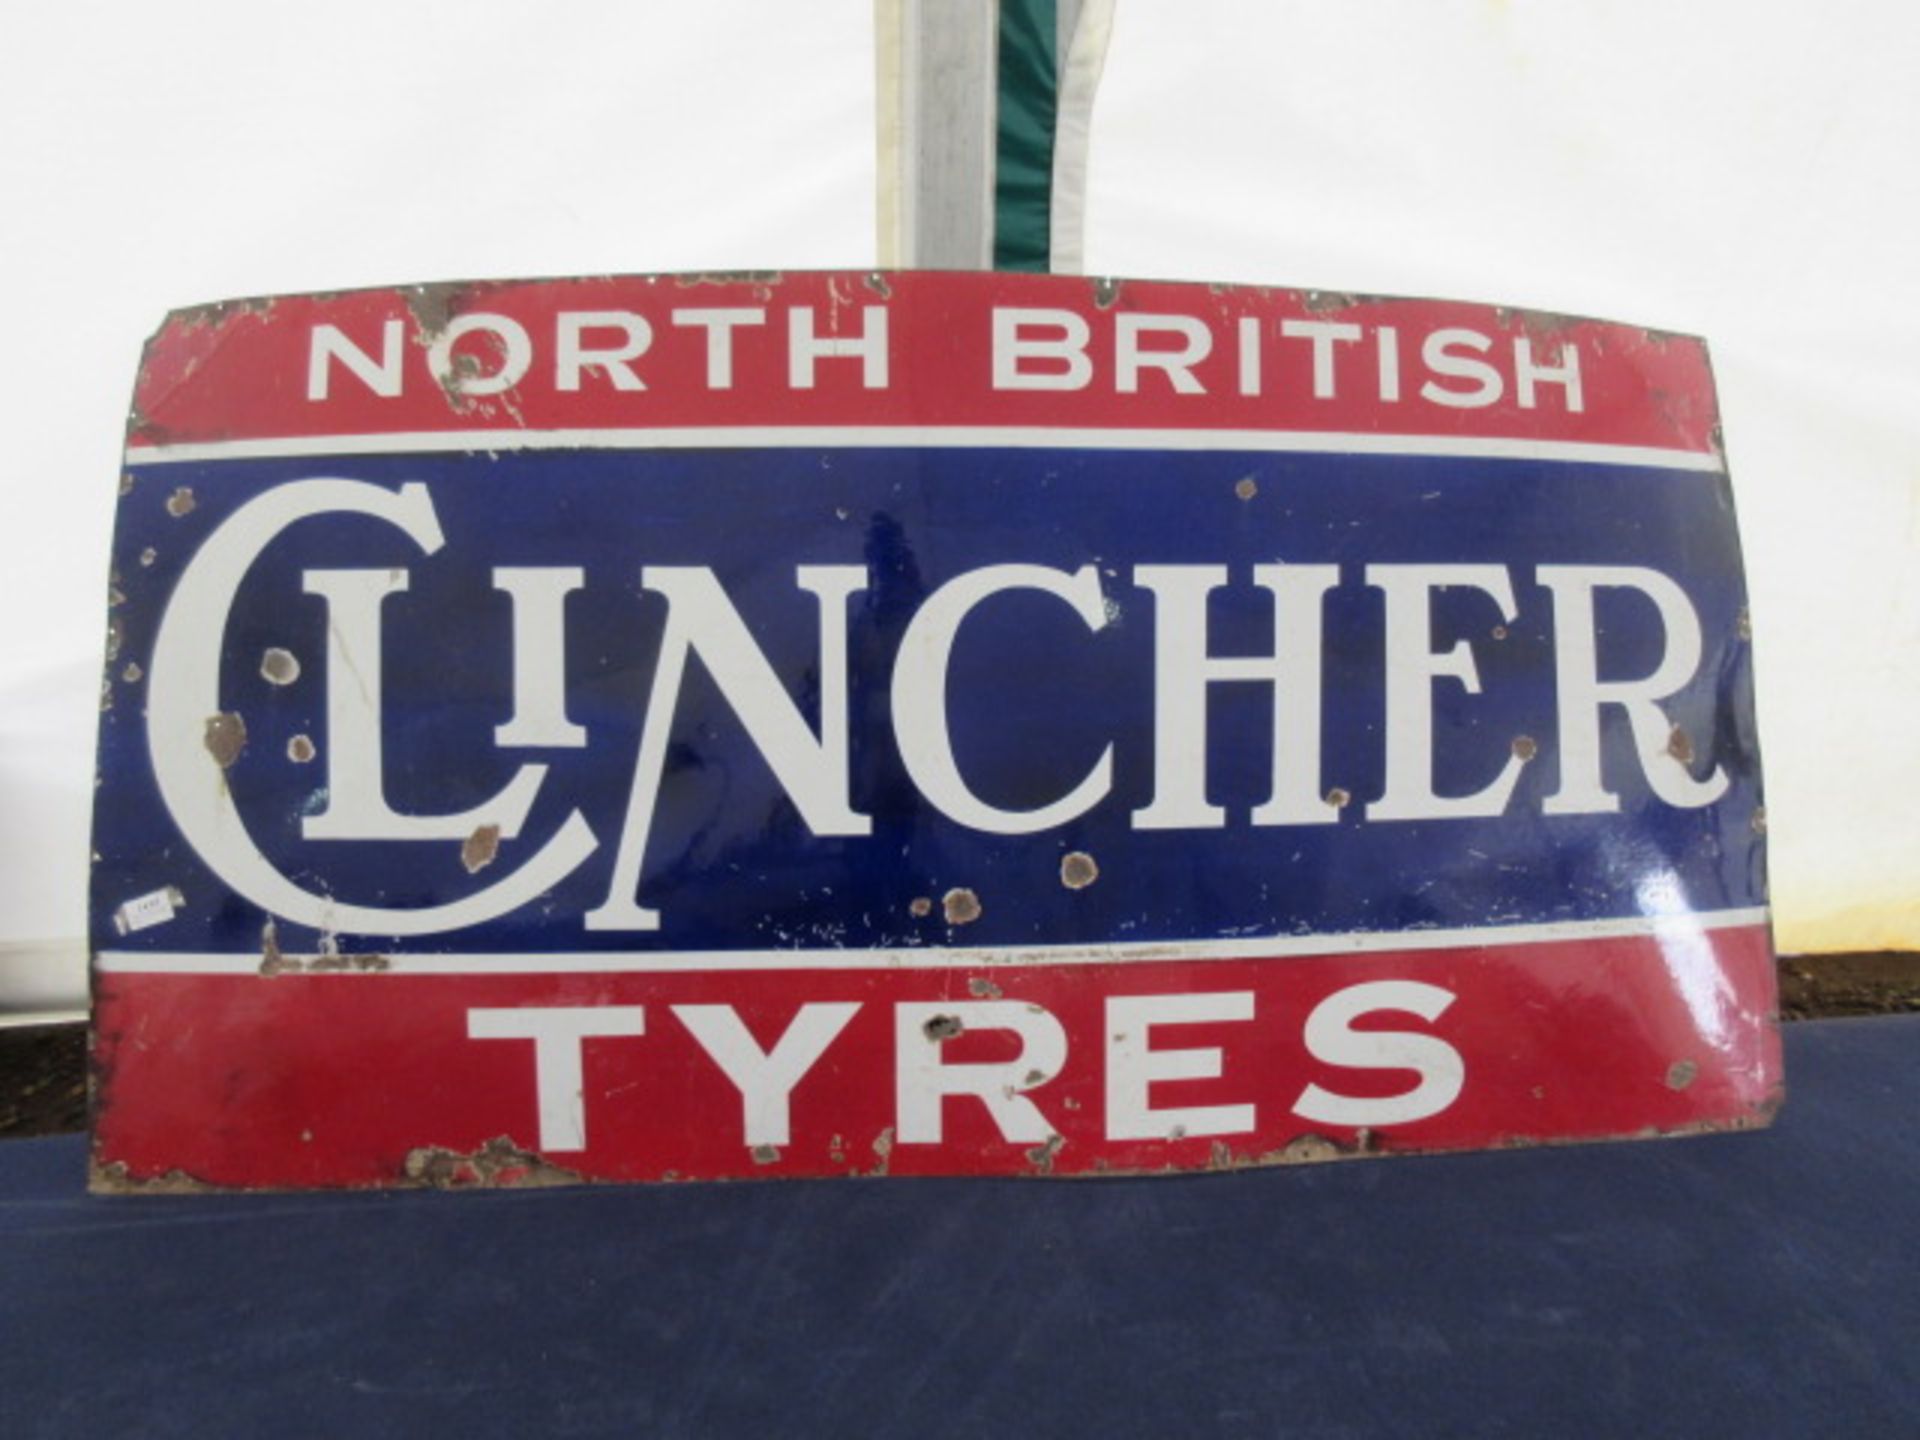 North British Clincher tyres, a large enamel sign 2m x 1m